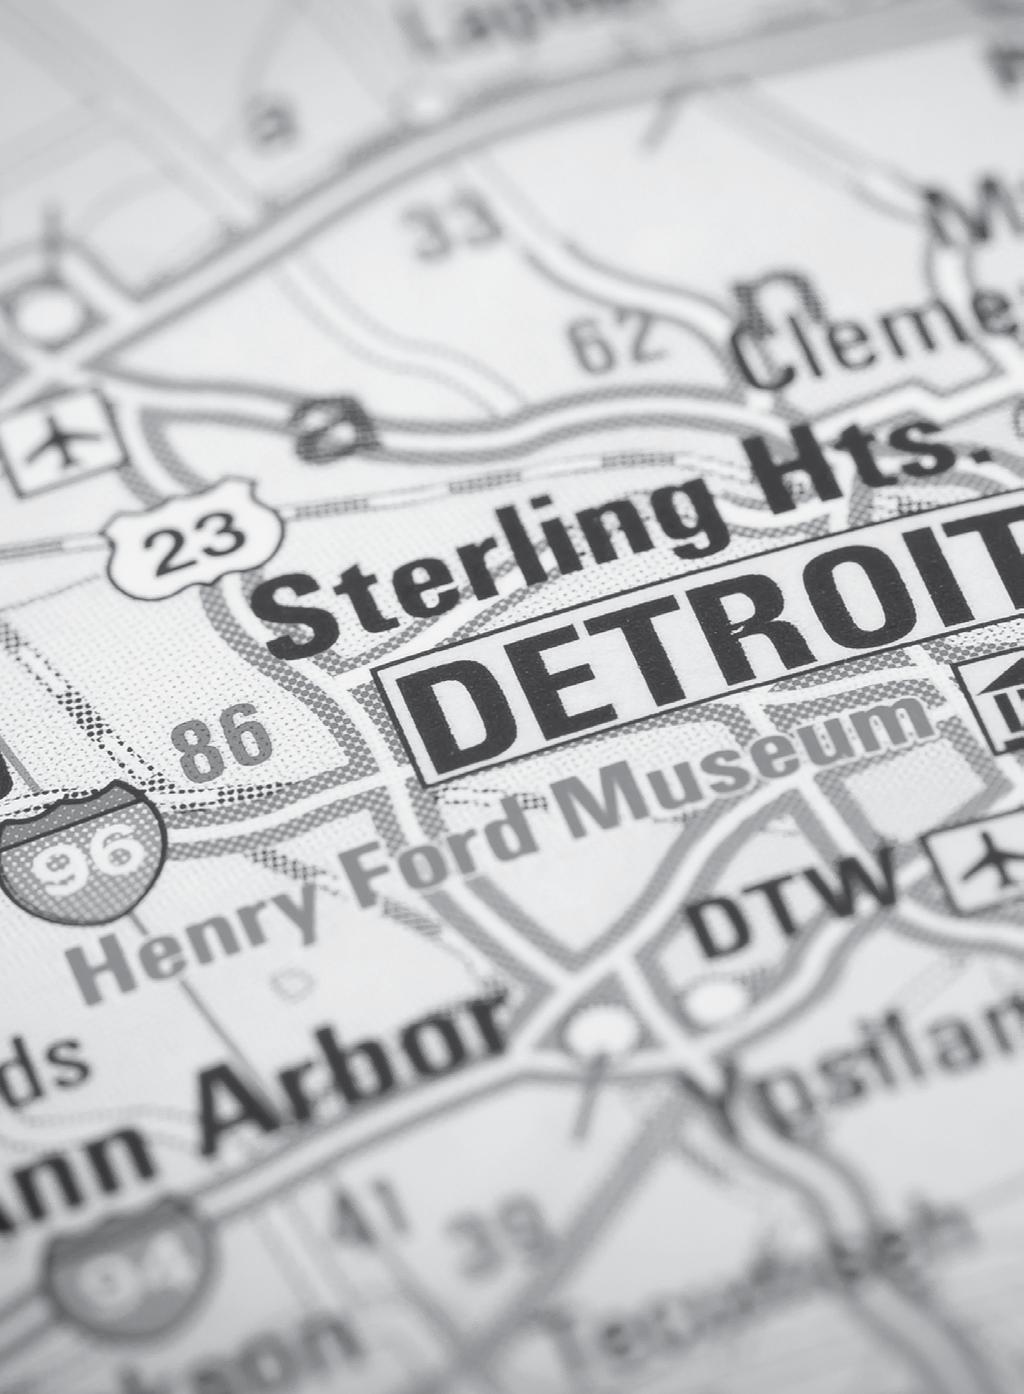 City of Detroit Filing Information As part of a partnership that will help the city provide improved taxpayer service and run more efficiently, the Michigan Department of Treasury will begin to